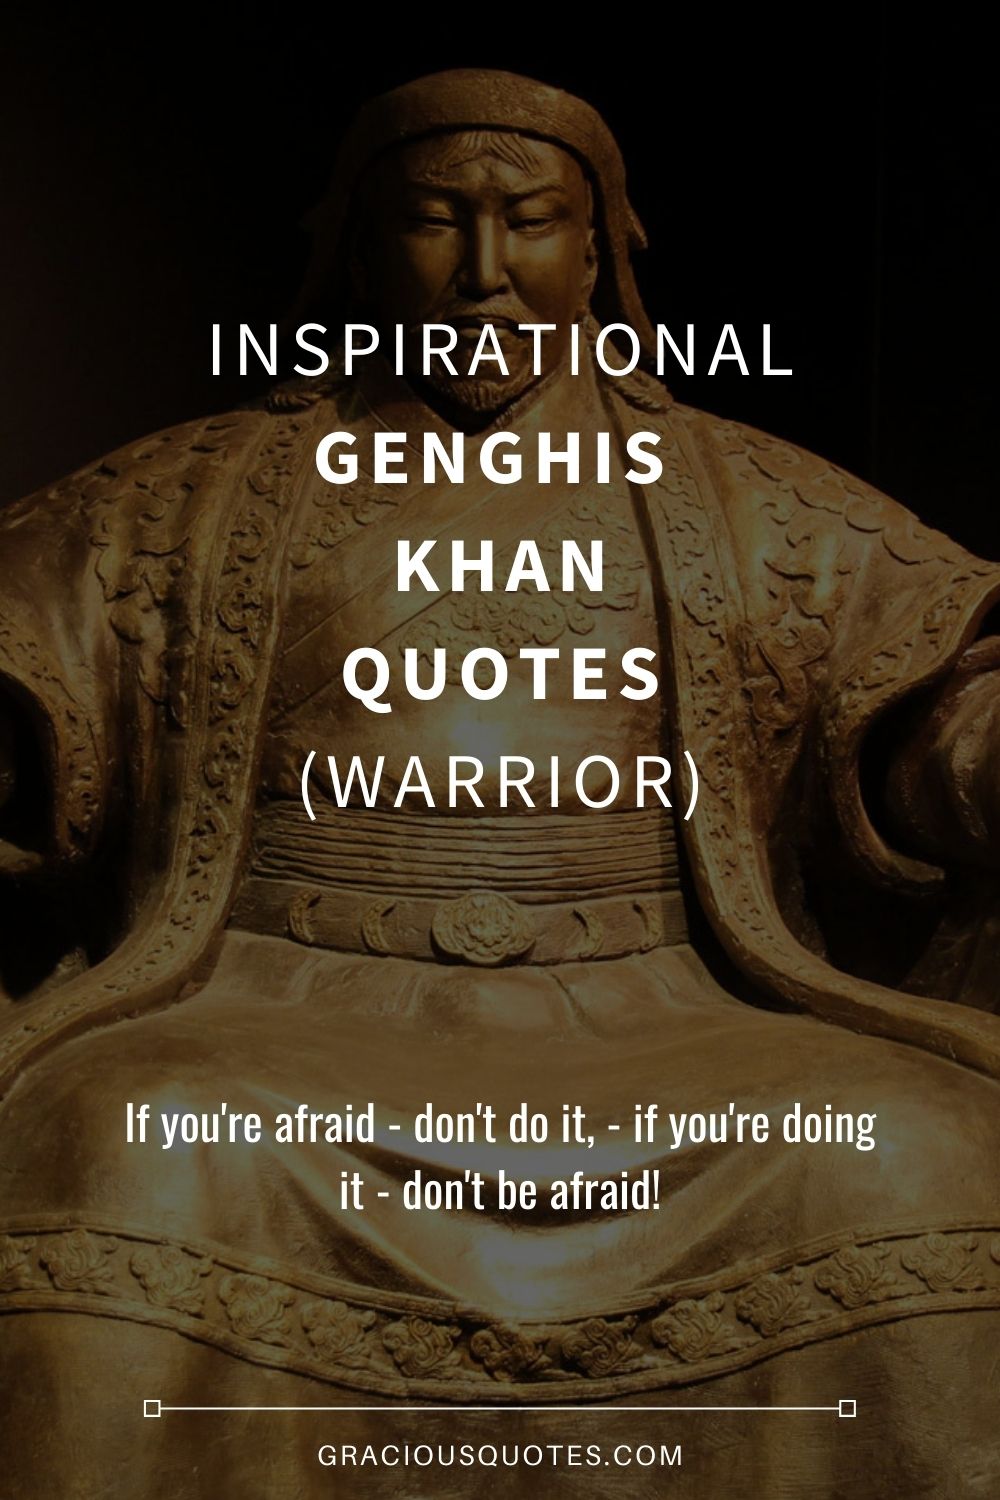 Inspirational Genghis Khan Quotes (WARRIOR) - Gracious Quotes